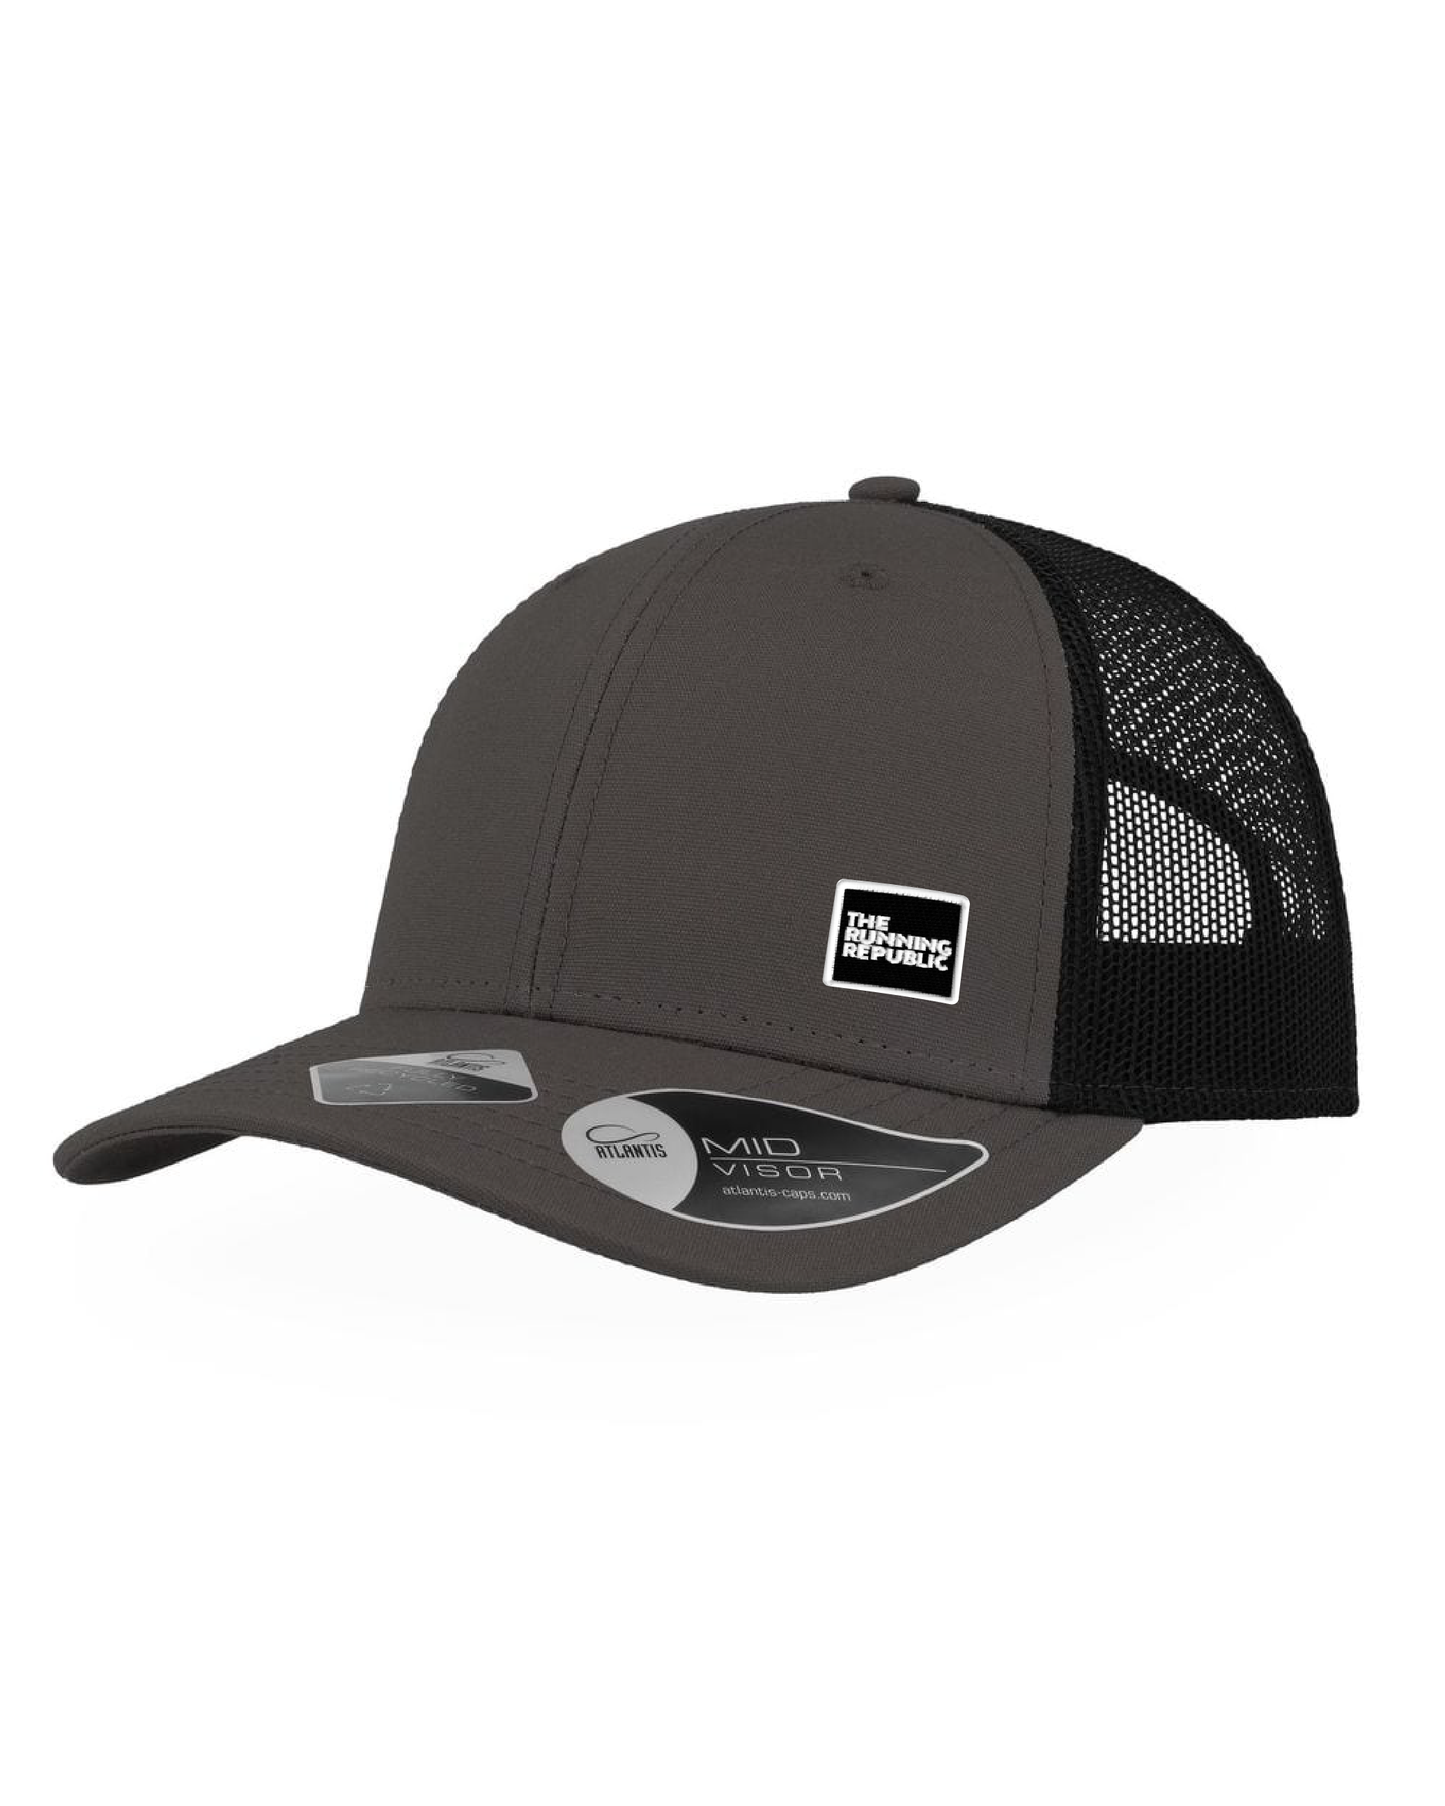 Gorra Recycled Polyester Trucker "TRR" (One Size) - Grey